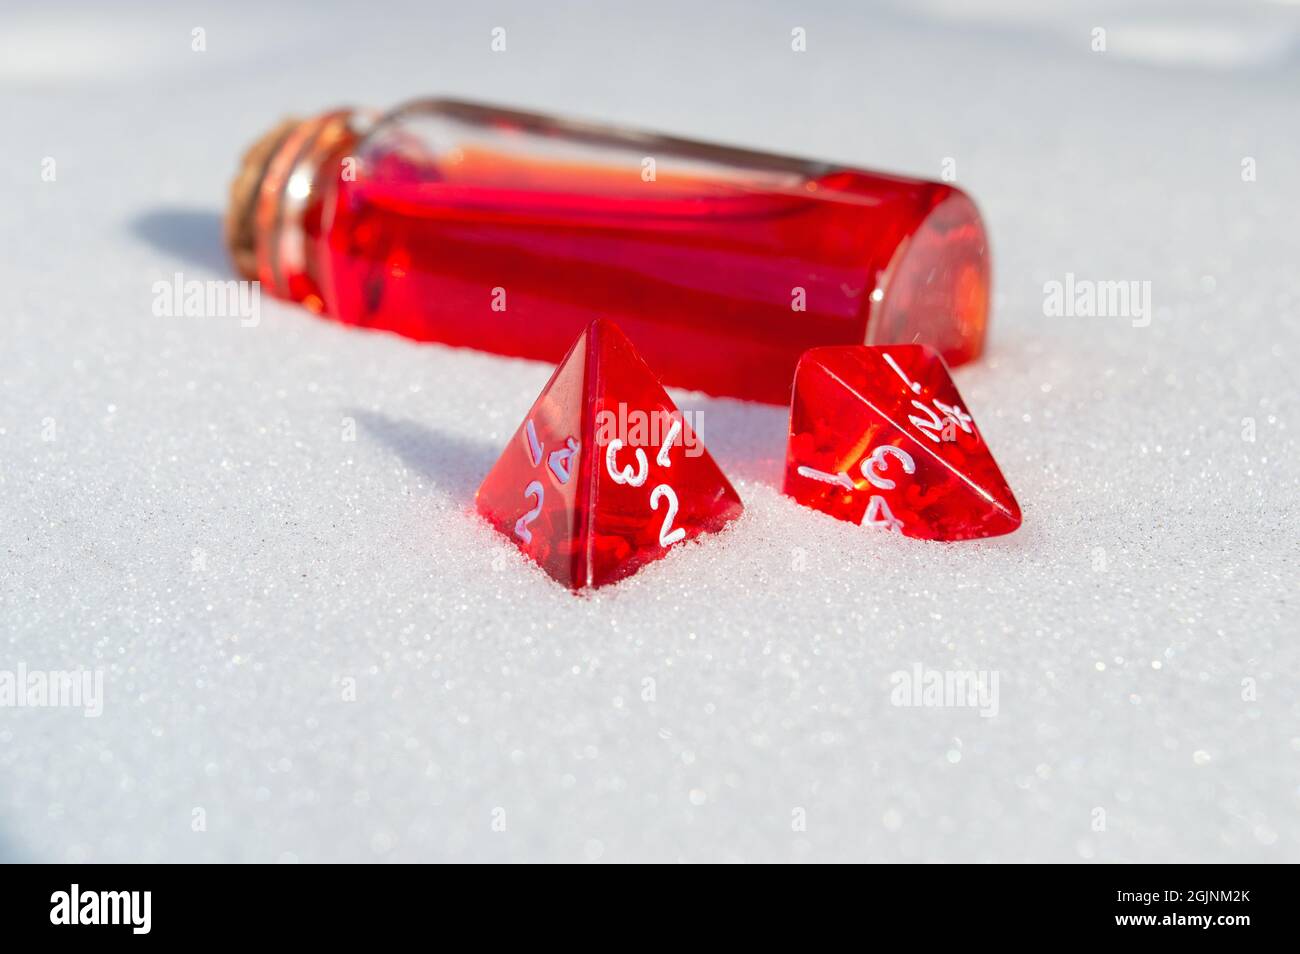 Close-up image of two red 4-sided role-playing game dice in the snow. In the background a glass stopper bottle  with red liquid Stock Photo